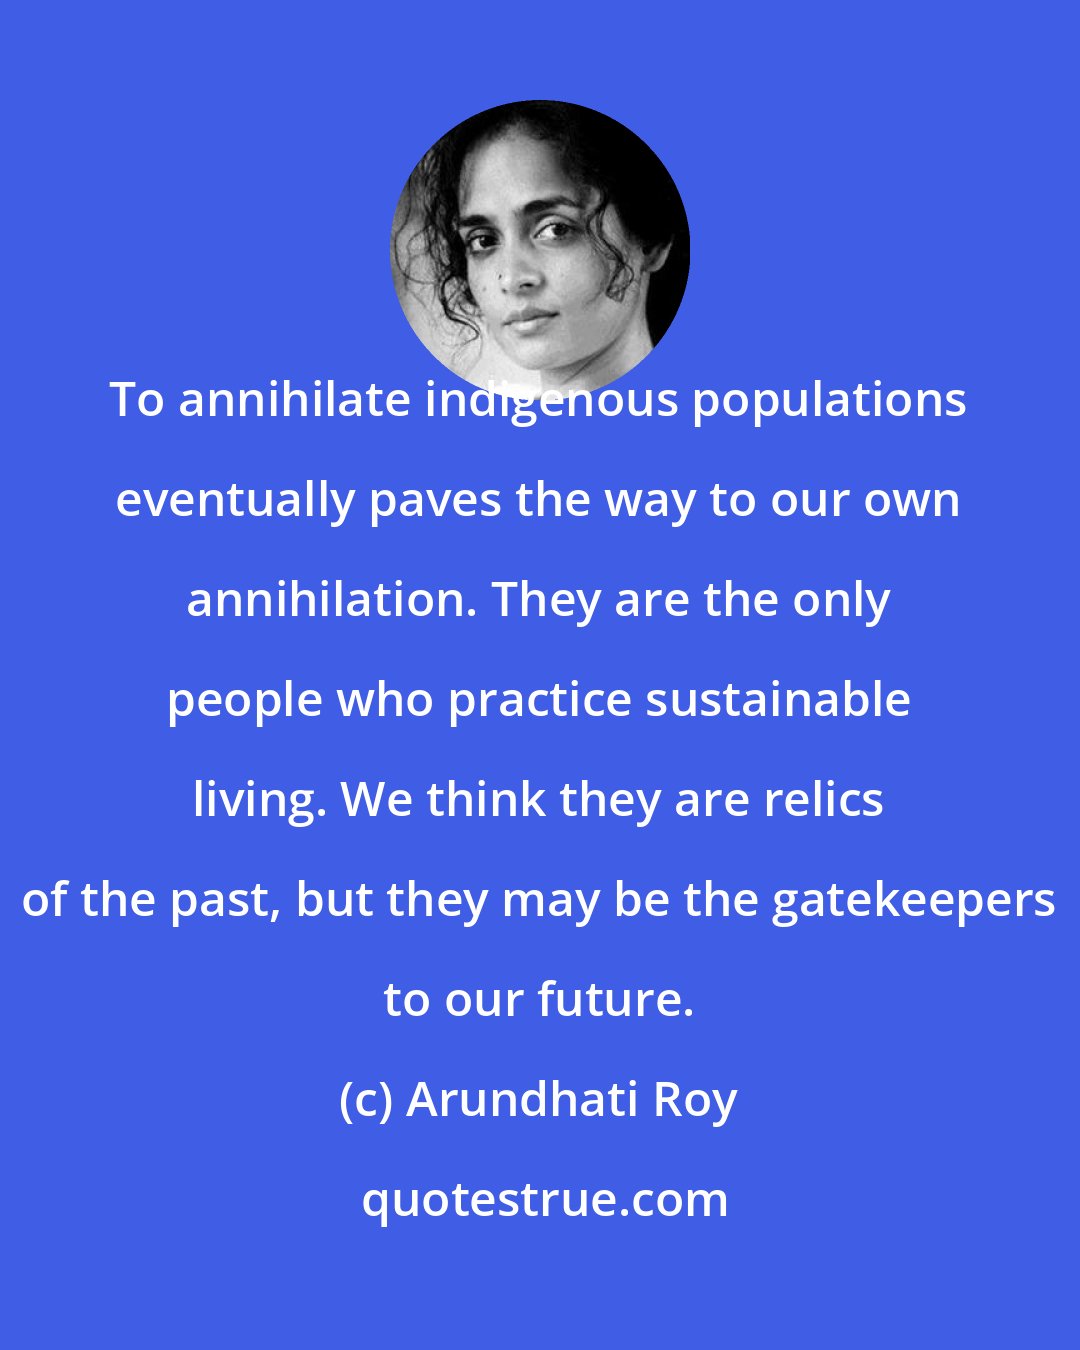 Arundhati Roy: To annihilate indigenous populations eventually paves the way to our own annihilation. They are the only people who practice sustainable living. We think they are relics of the past, but they may be the gatekeepers to our future.